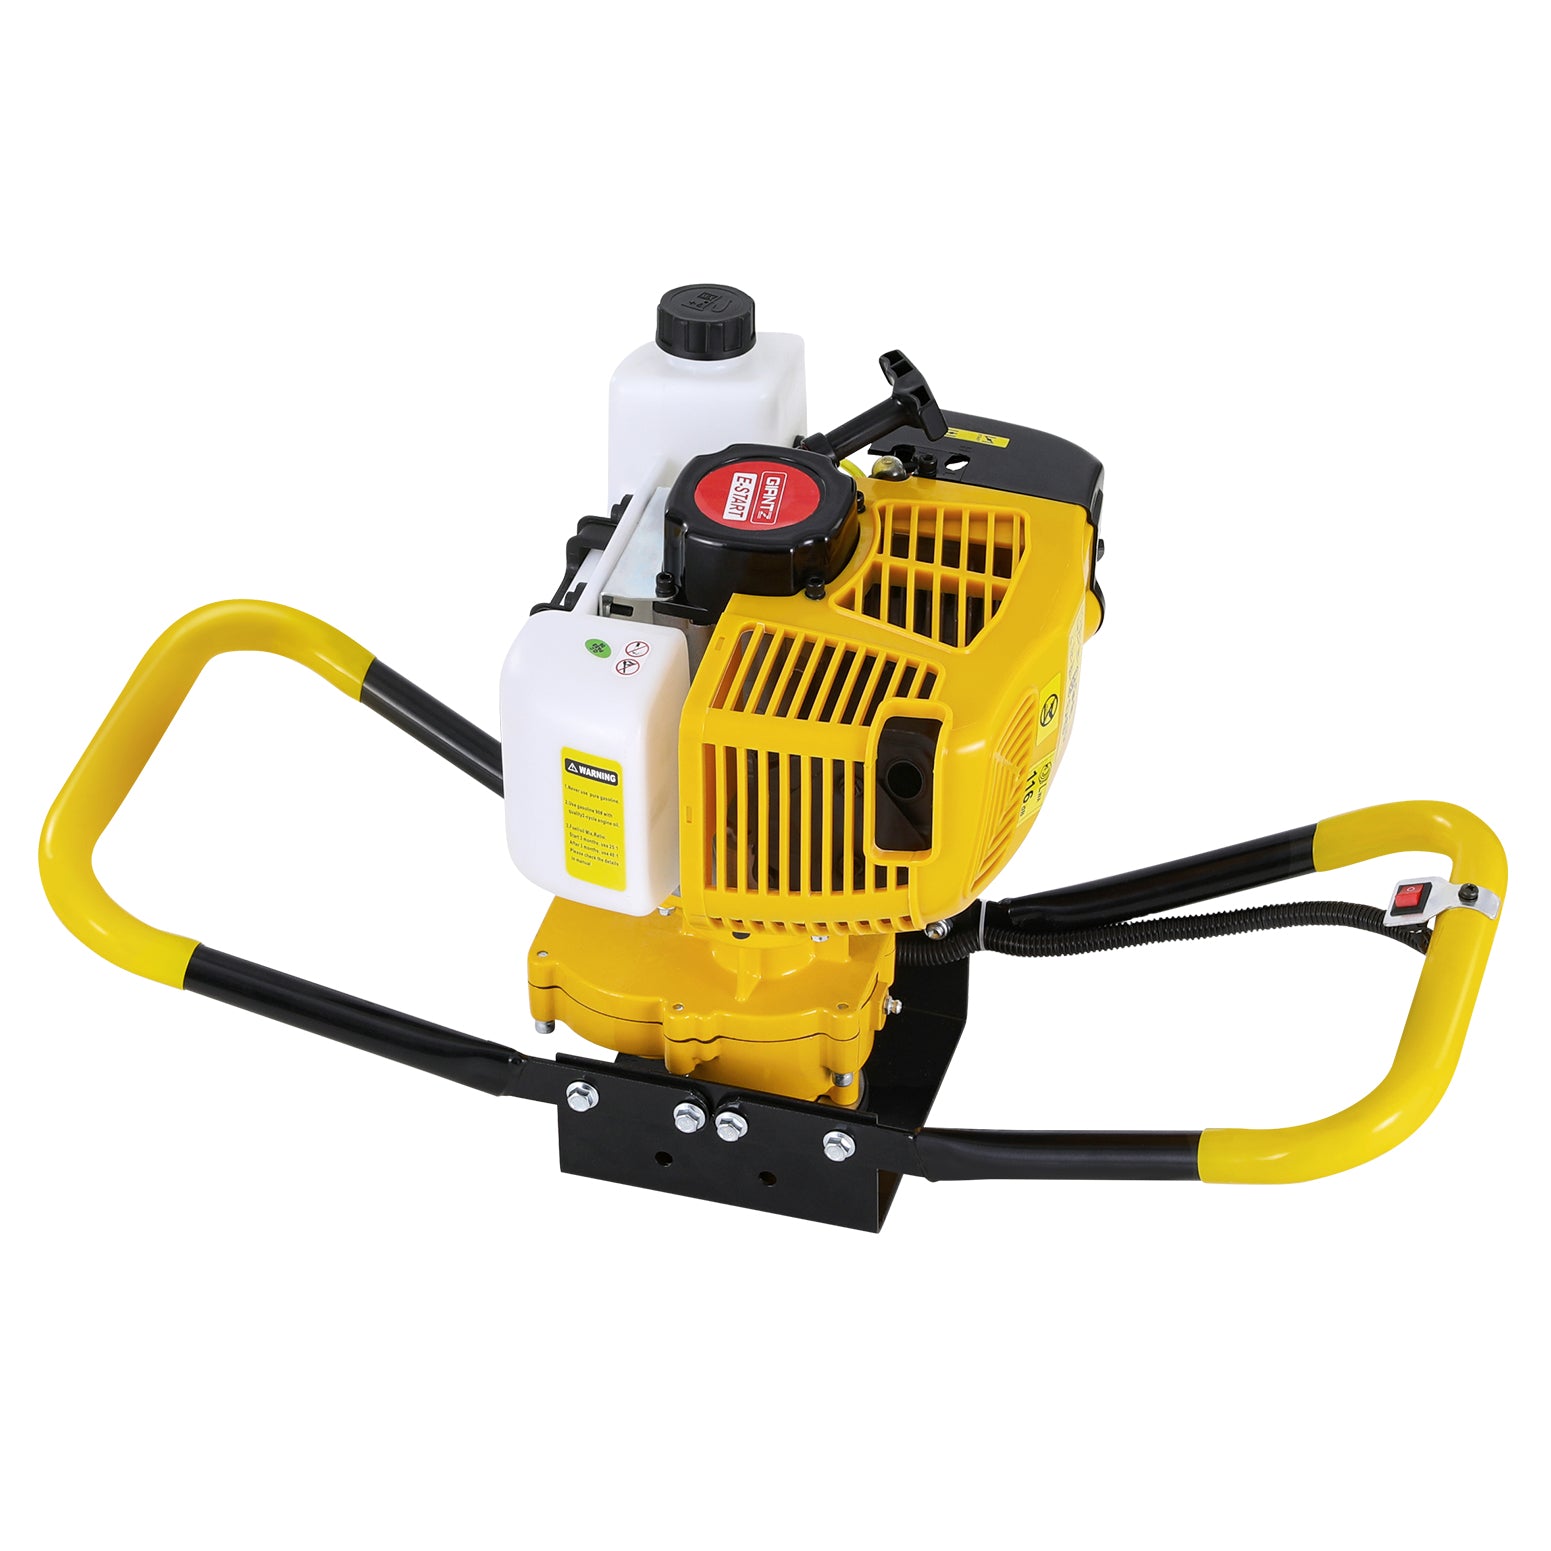 Giantz 74CC Post Hole Digger Motor Only Petrol Engine Yellow - SILBERSHELL